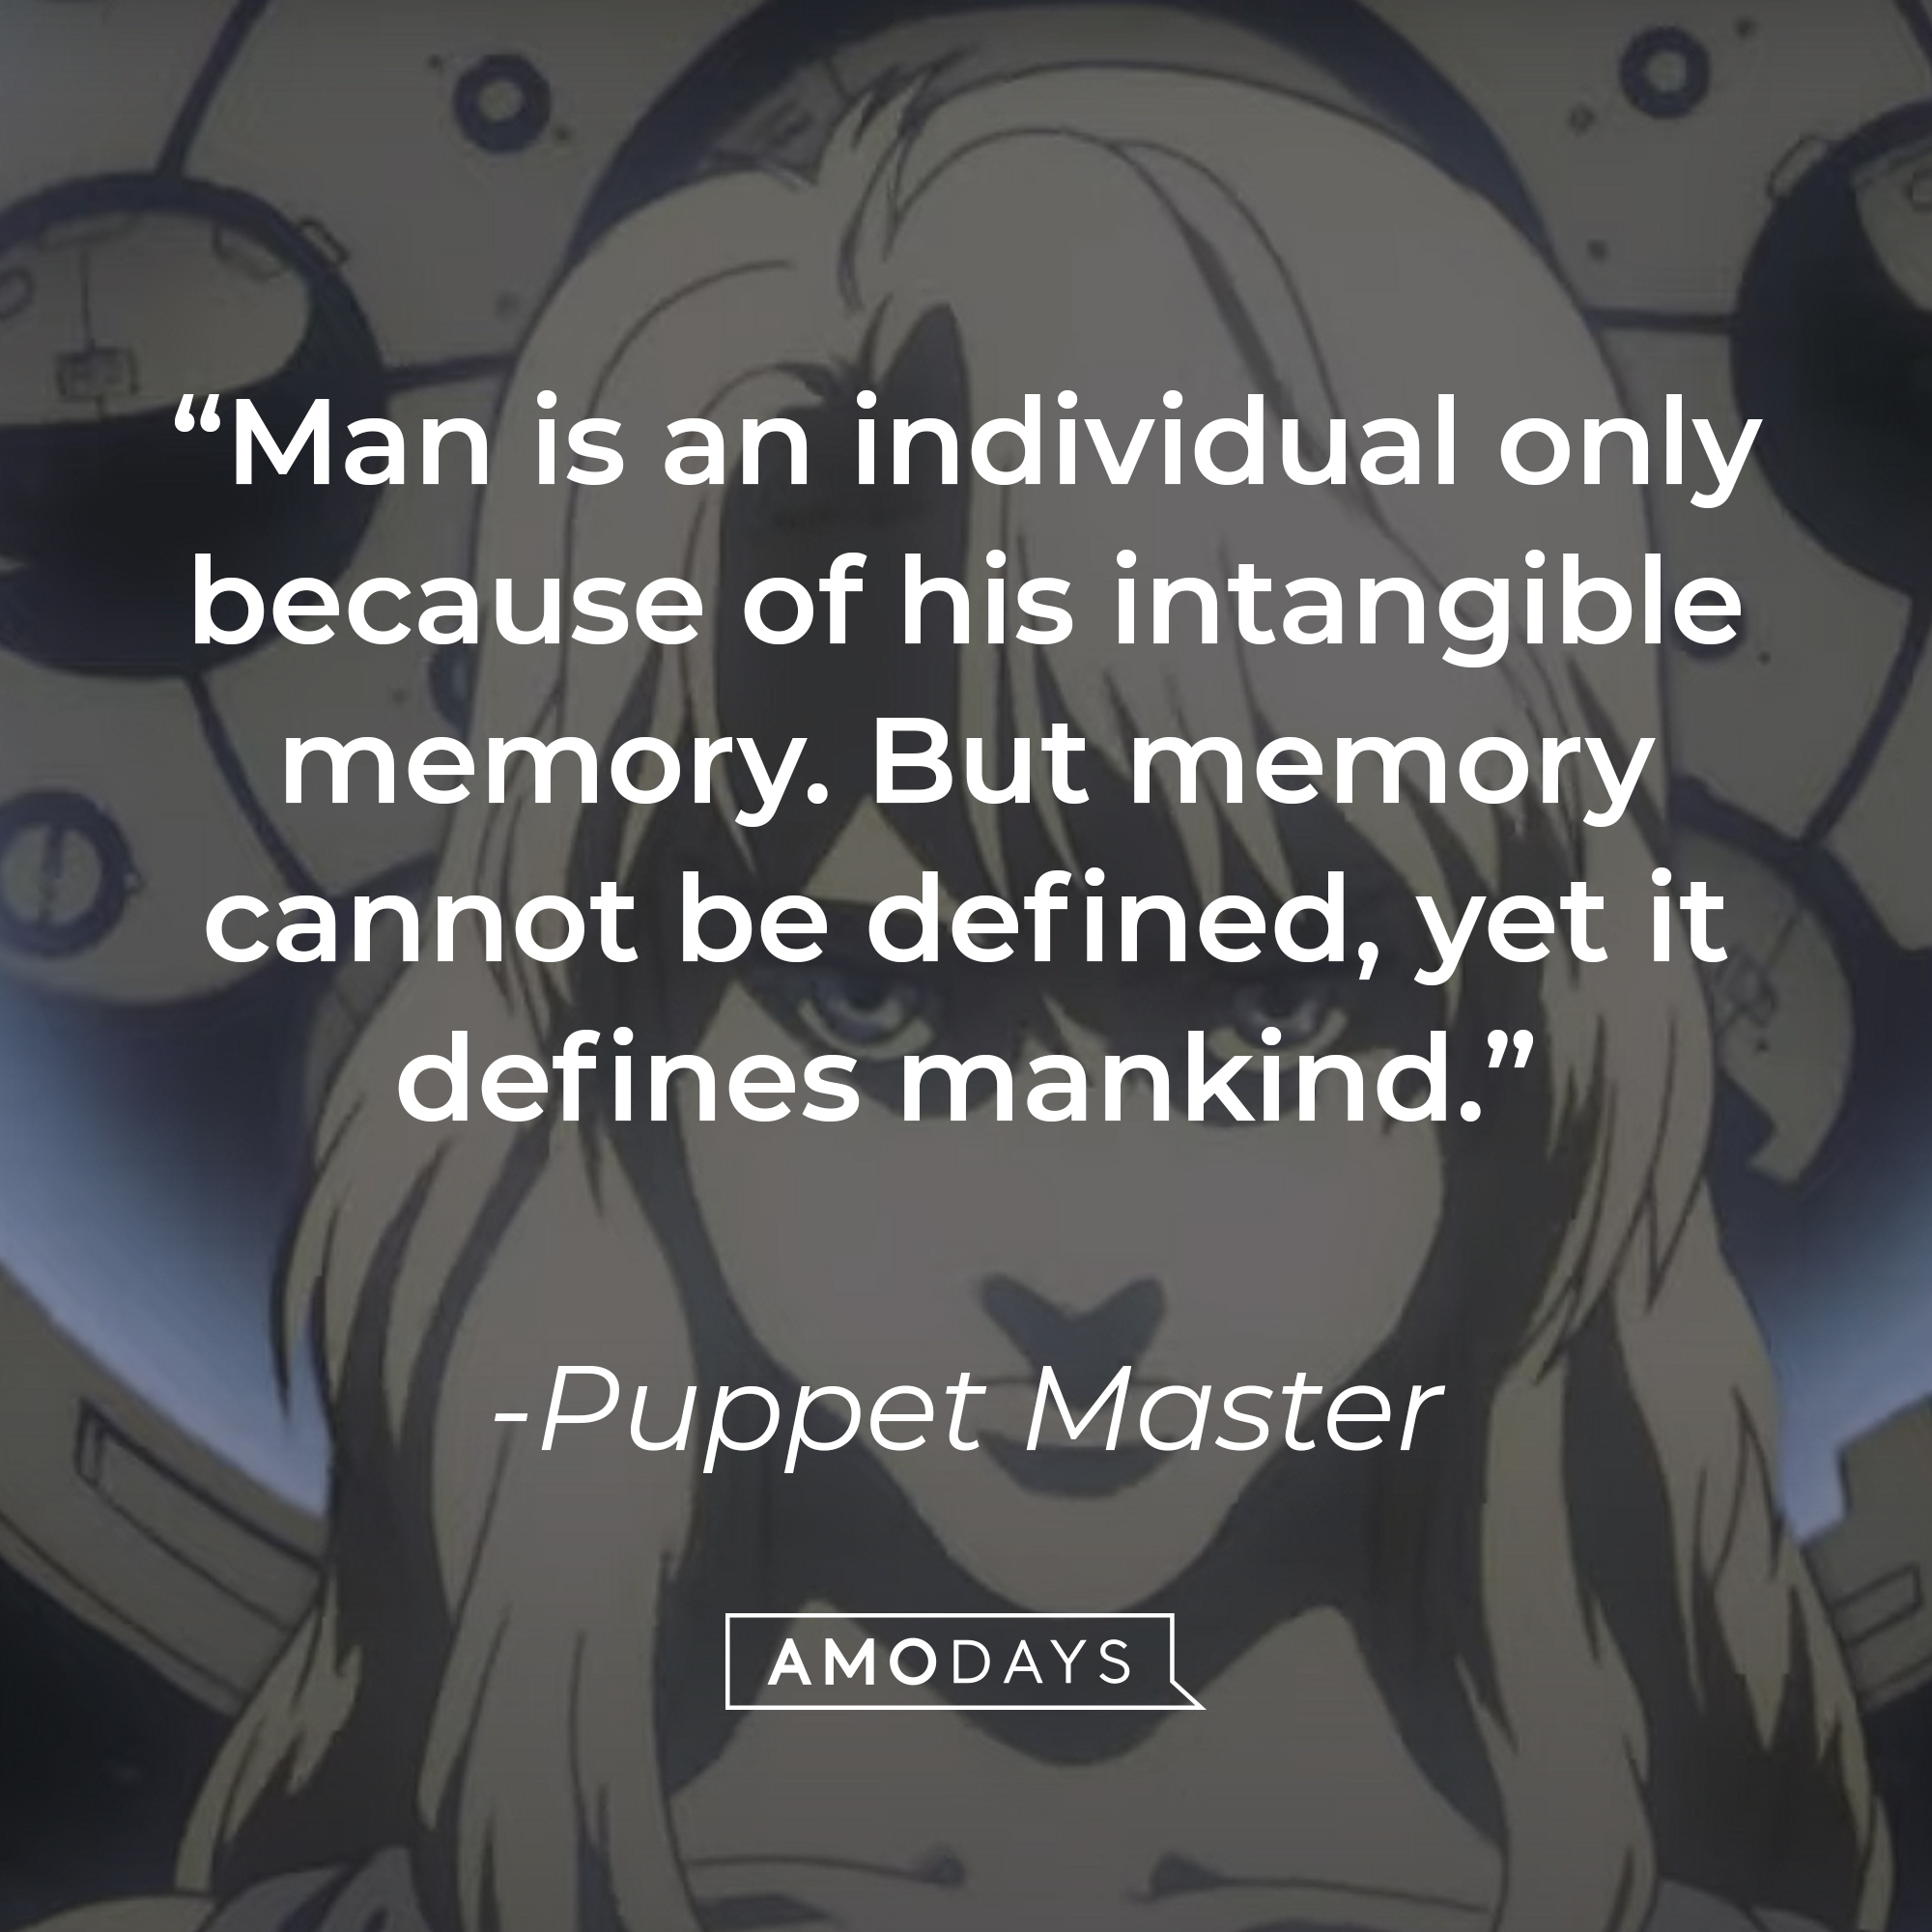 Puppet Master with his quote: "Man is an individual only because of his intangible memory. But memory cannot be defined, yet it defines mankind." | Source: YouTube.com/LionsgateMovies